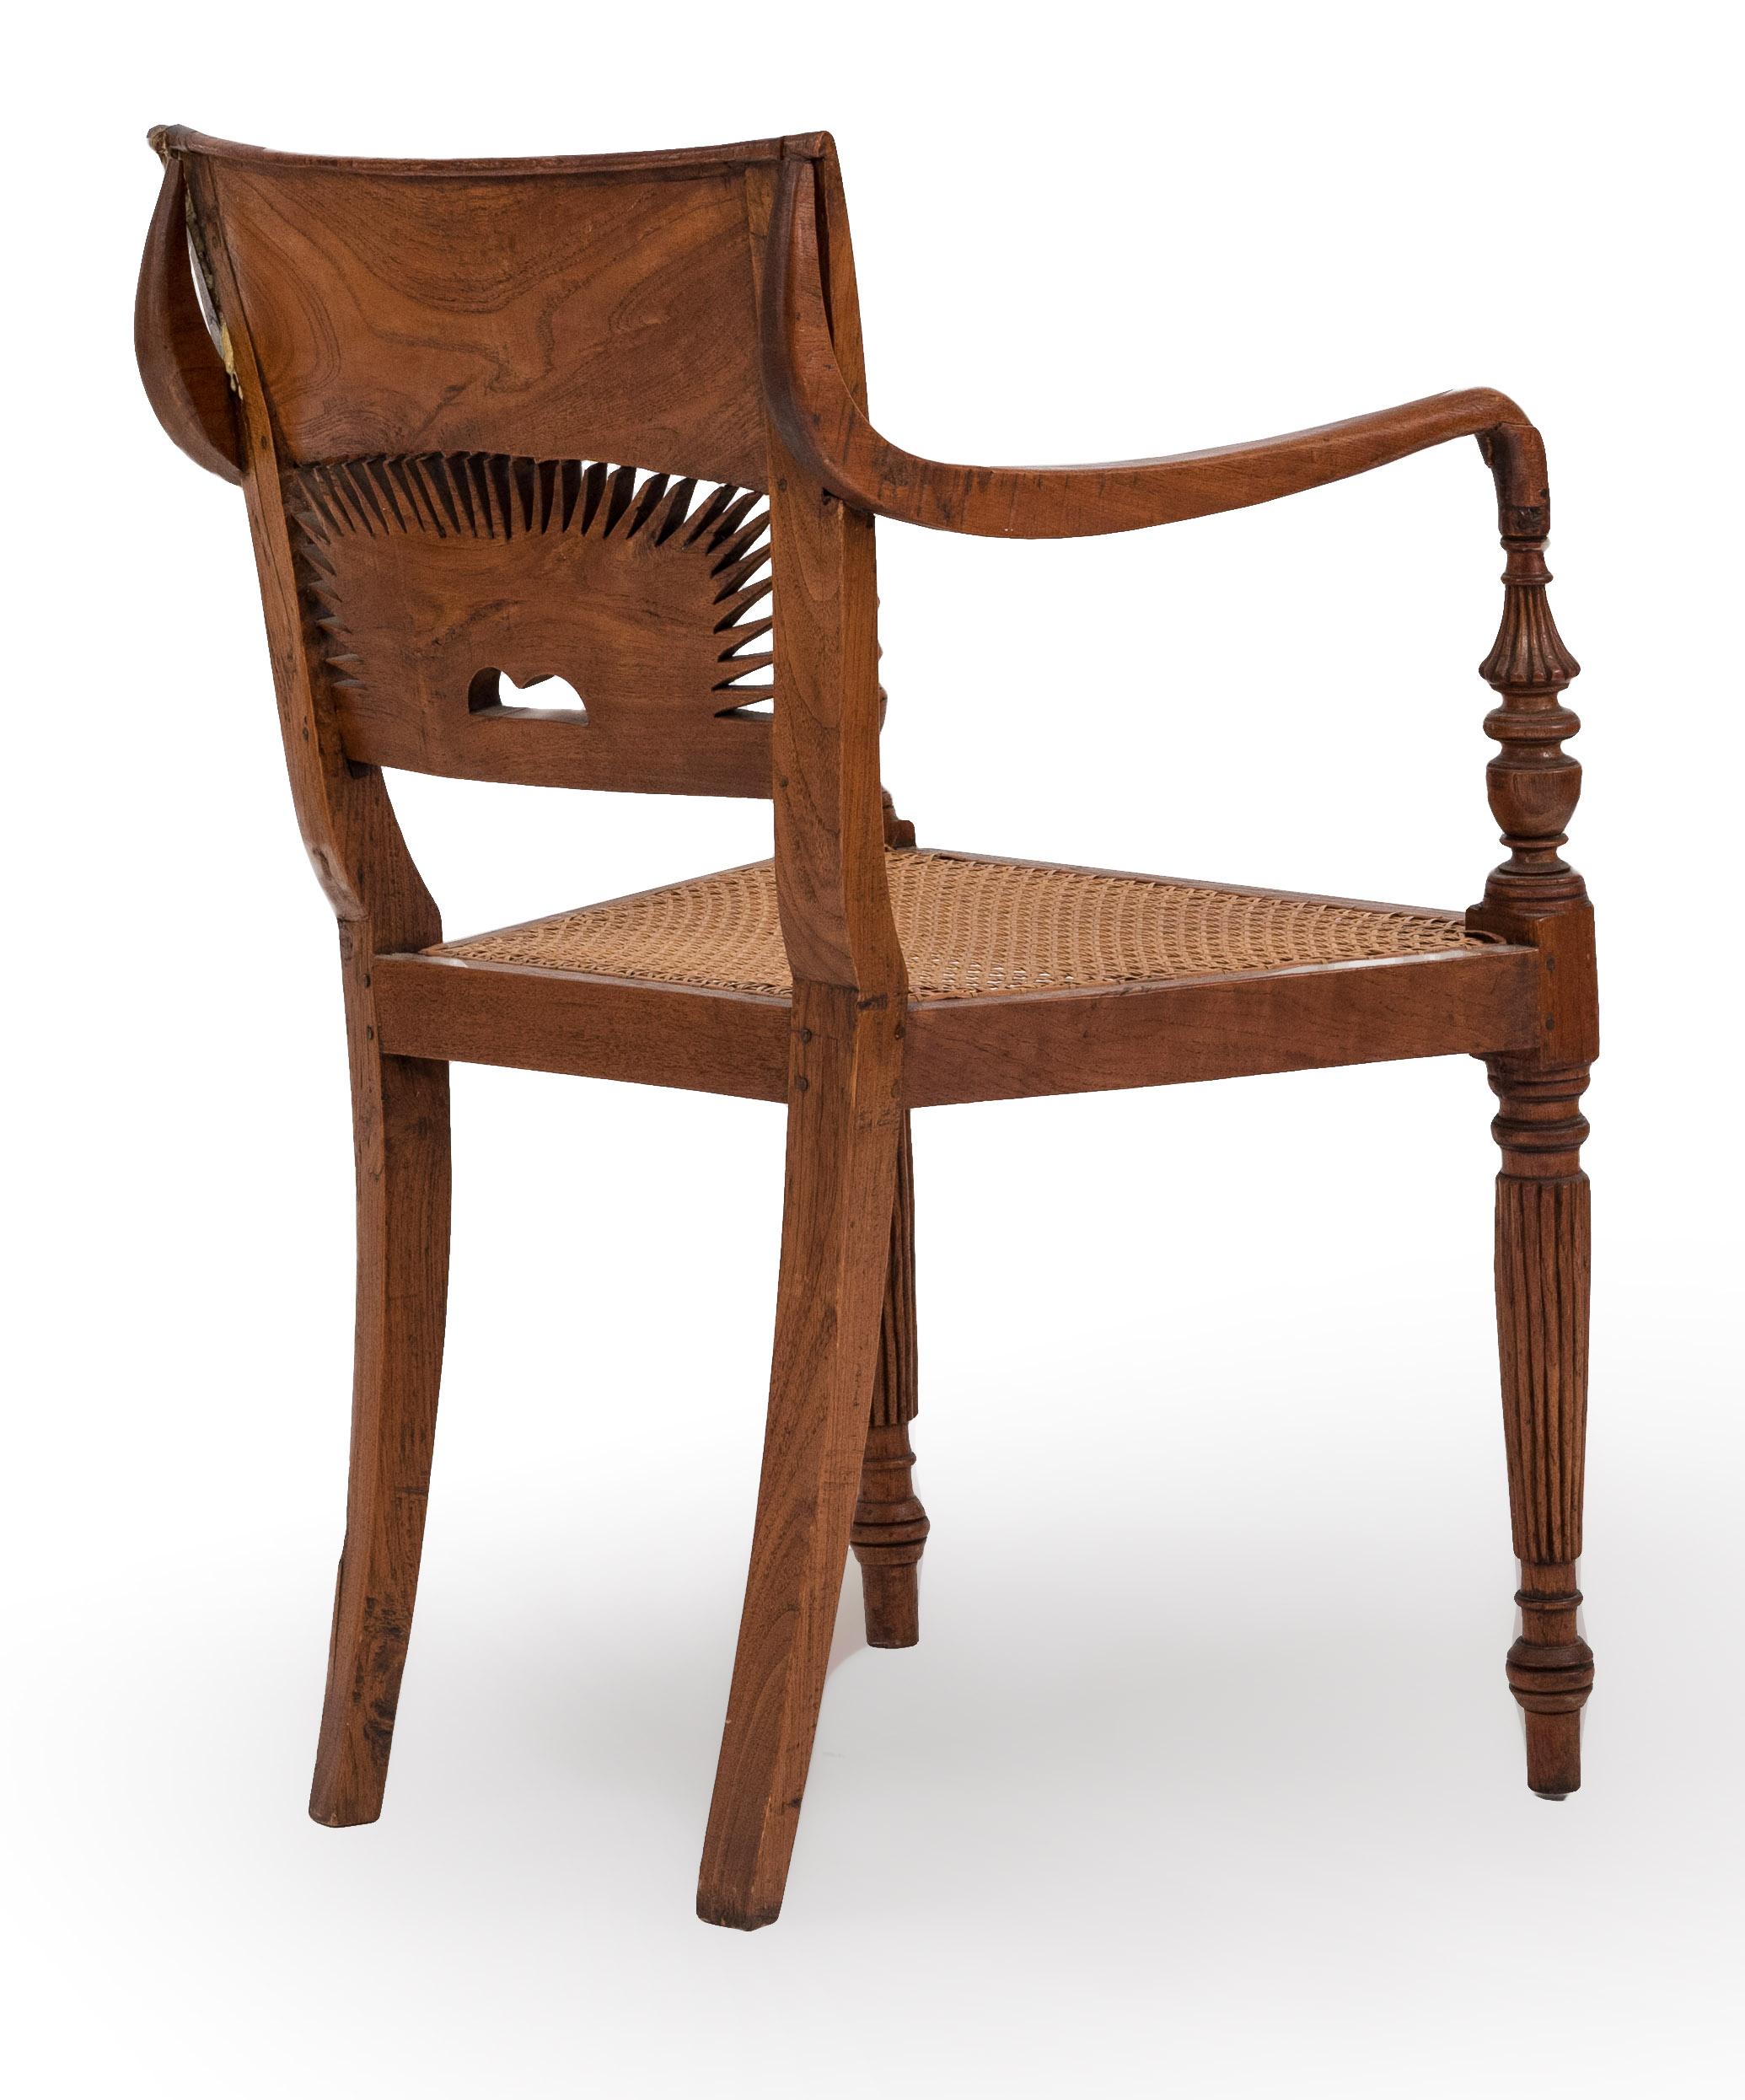 English Anglo-Indian Teak Arm Chair In Good Condition For Sale In New York, NY